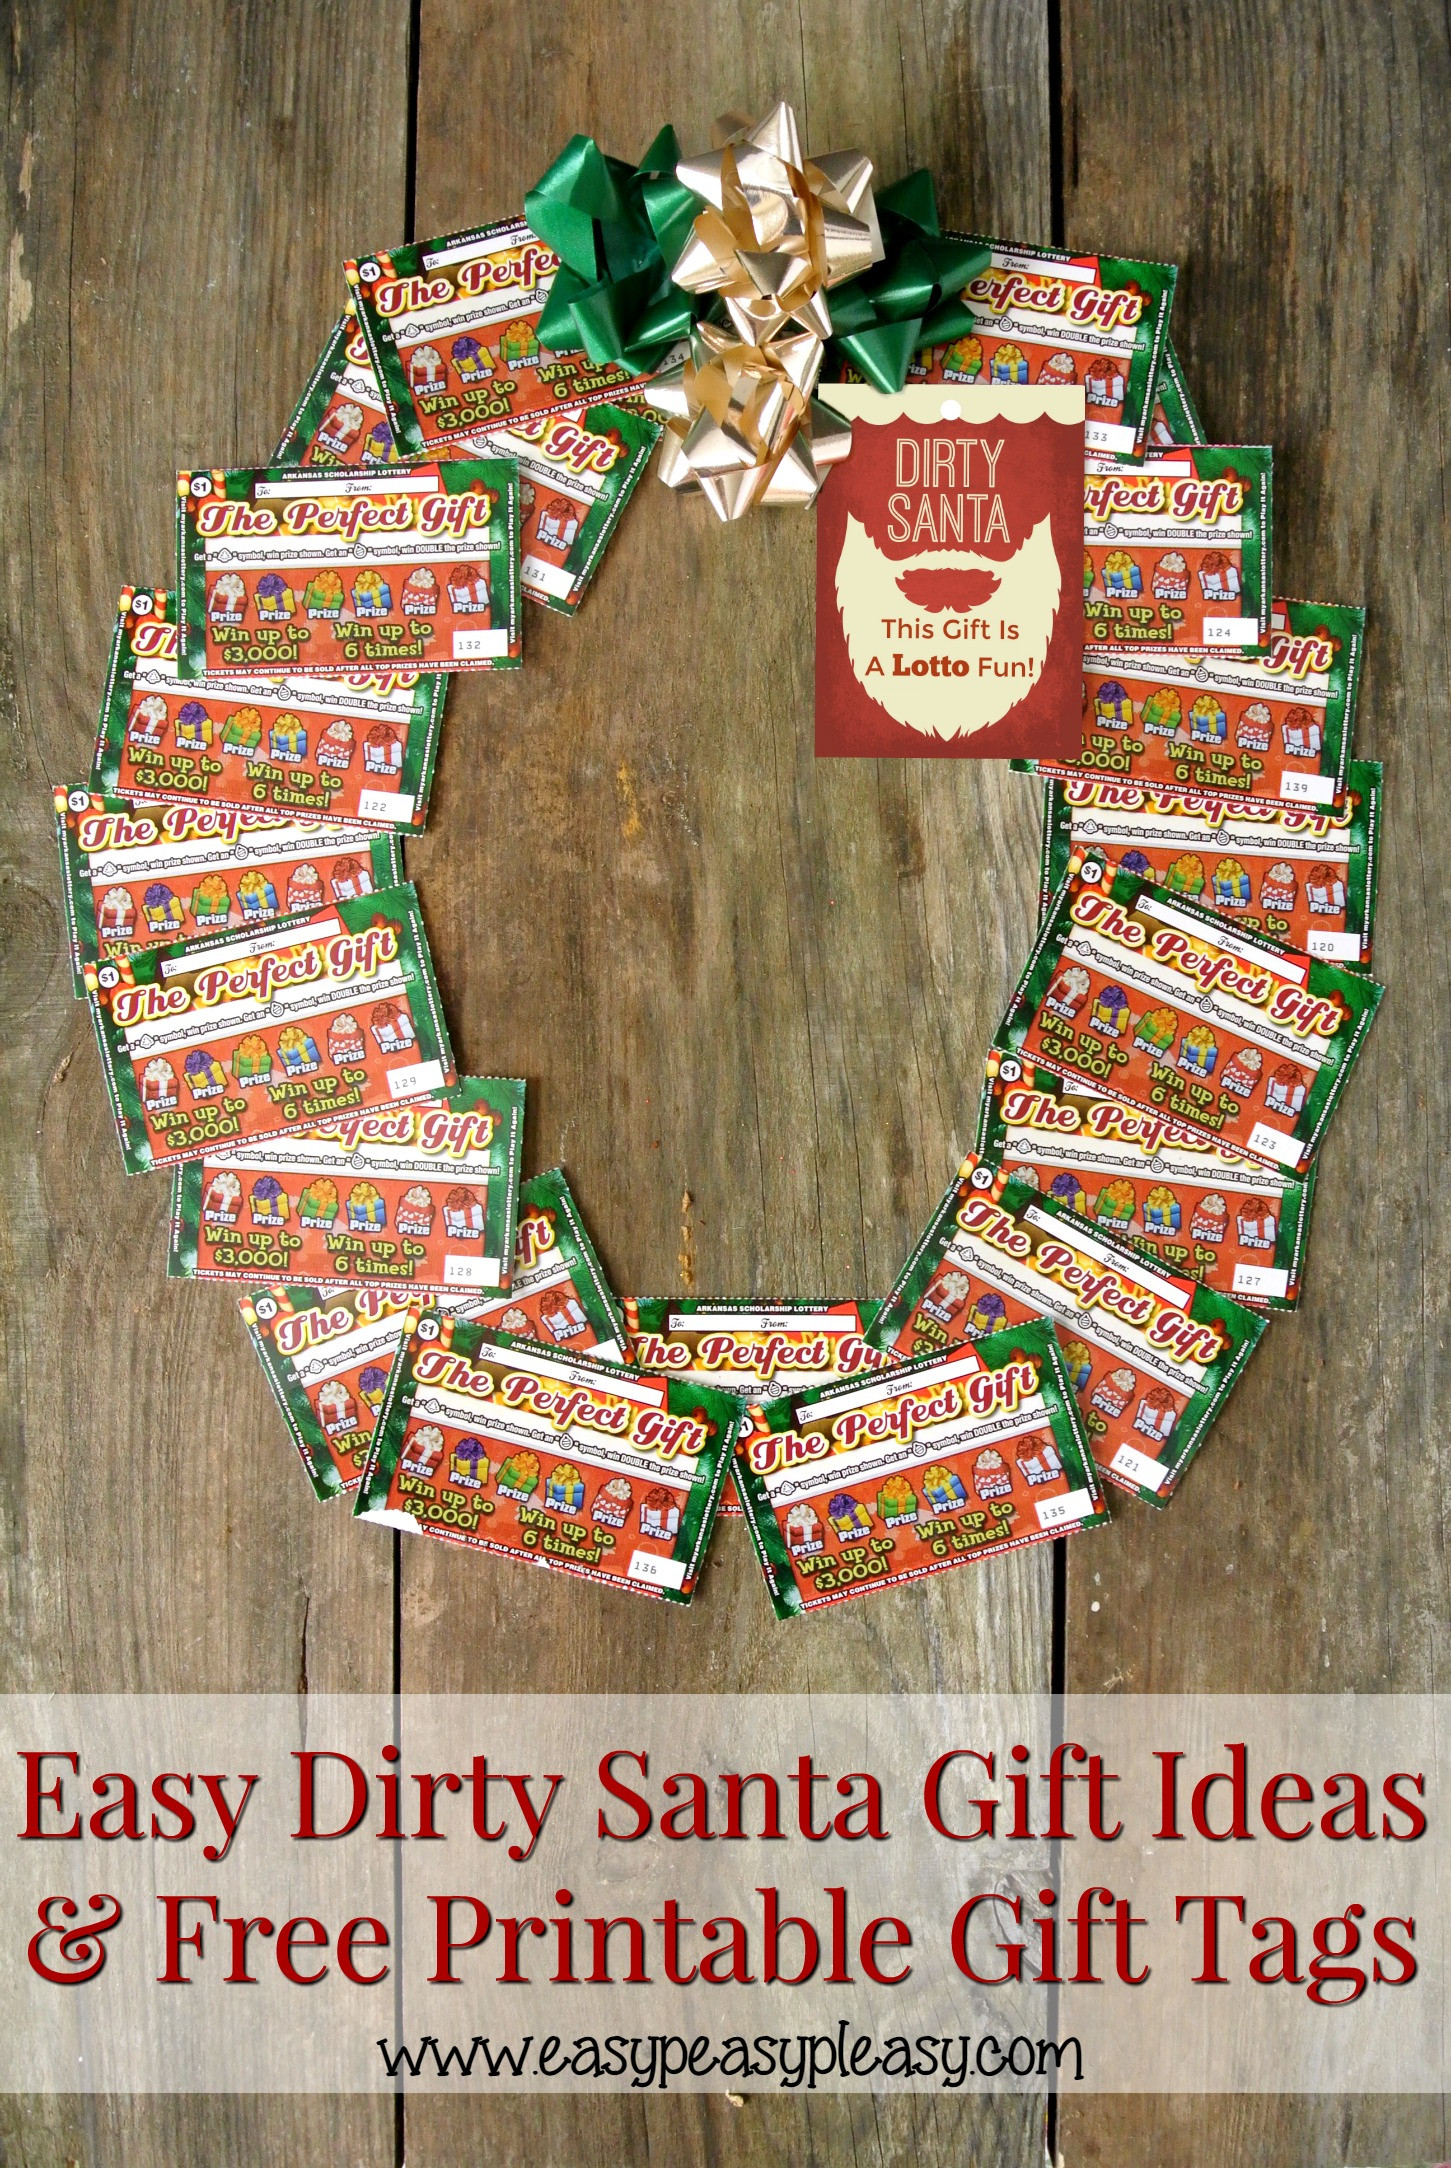 Lottery Ticket Christmas Gift Ideas
 Dirty Santa Lottery Tickets = The Perfect Gift Easy